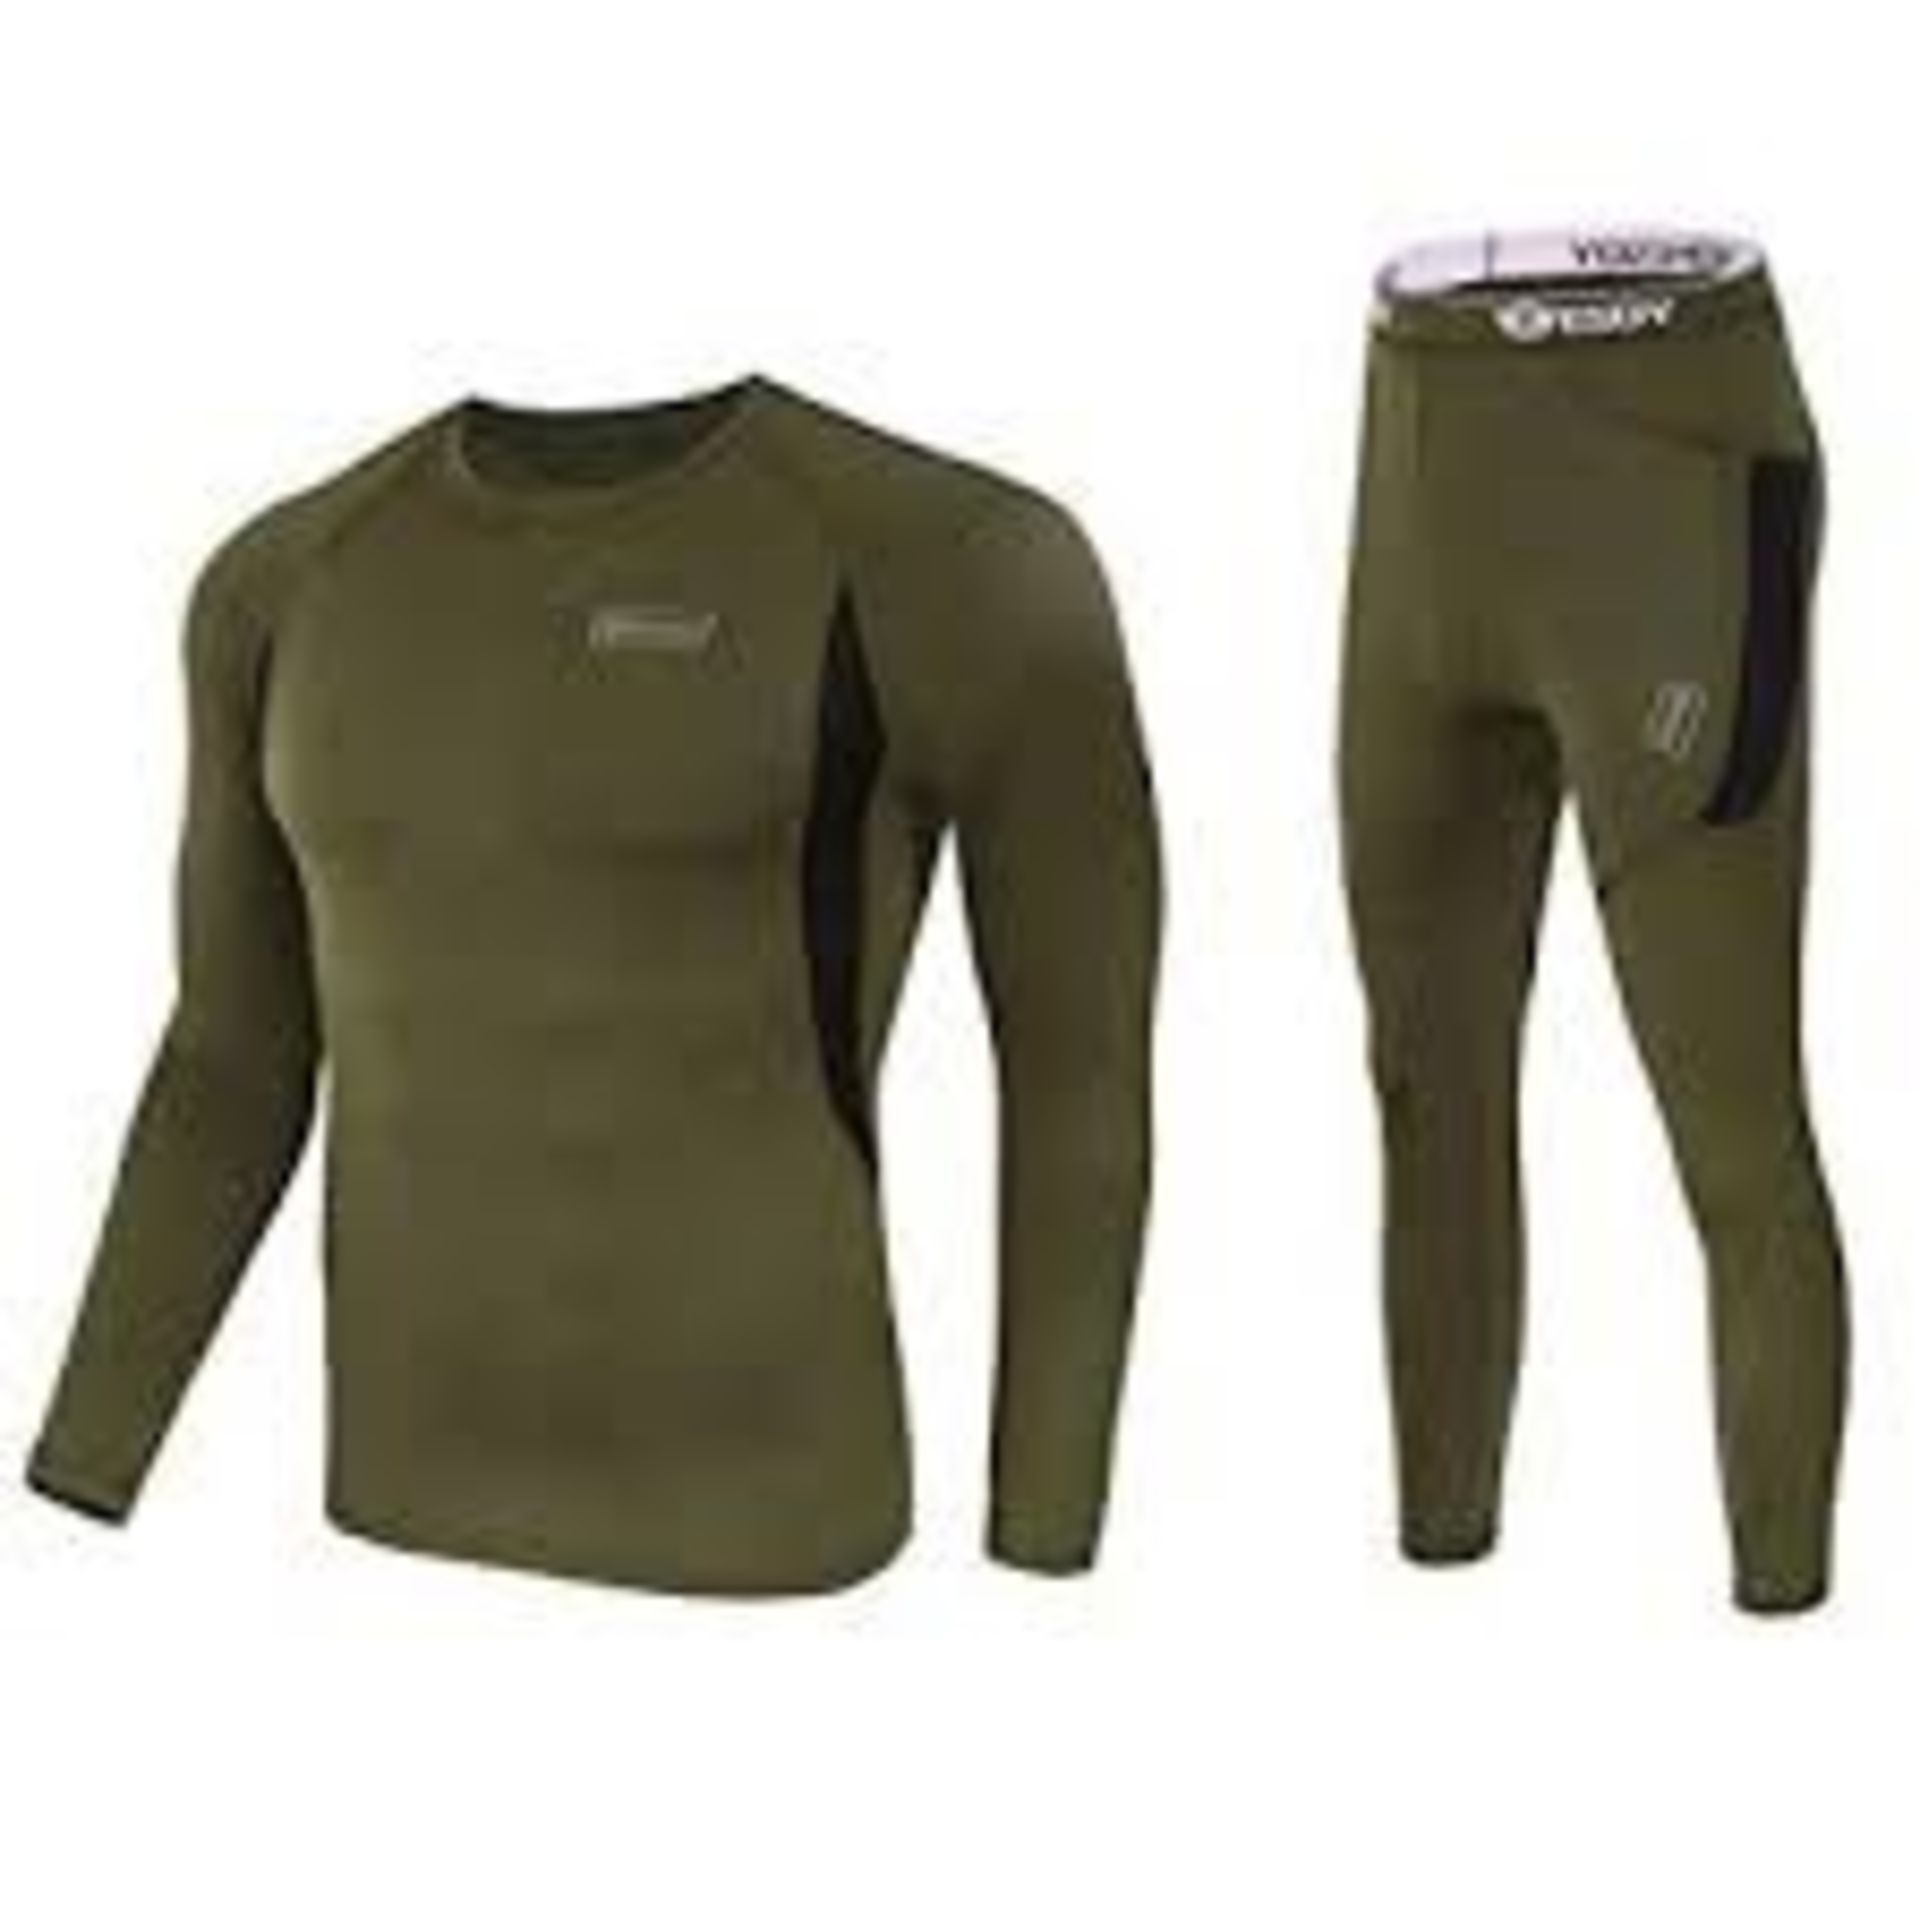 Assorted Brand New Esdy Mens Thermal Hiking Outdoor Protective Under Garments in Khaki with Black in